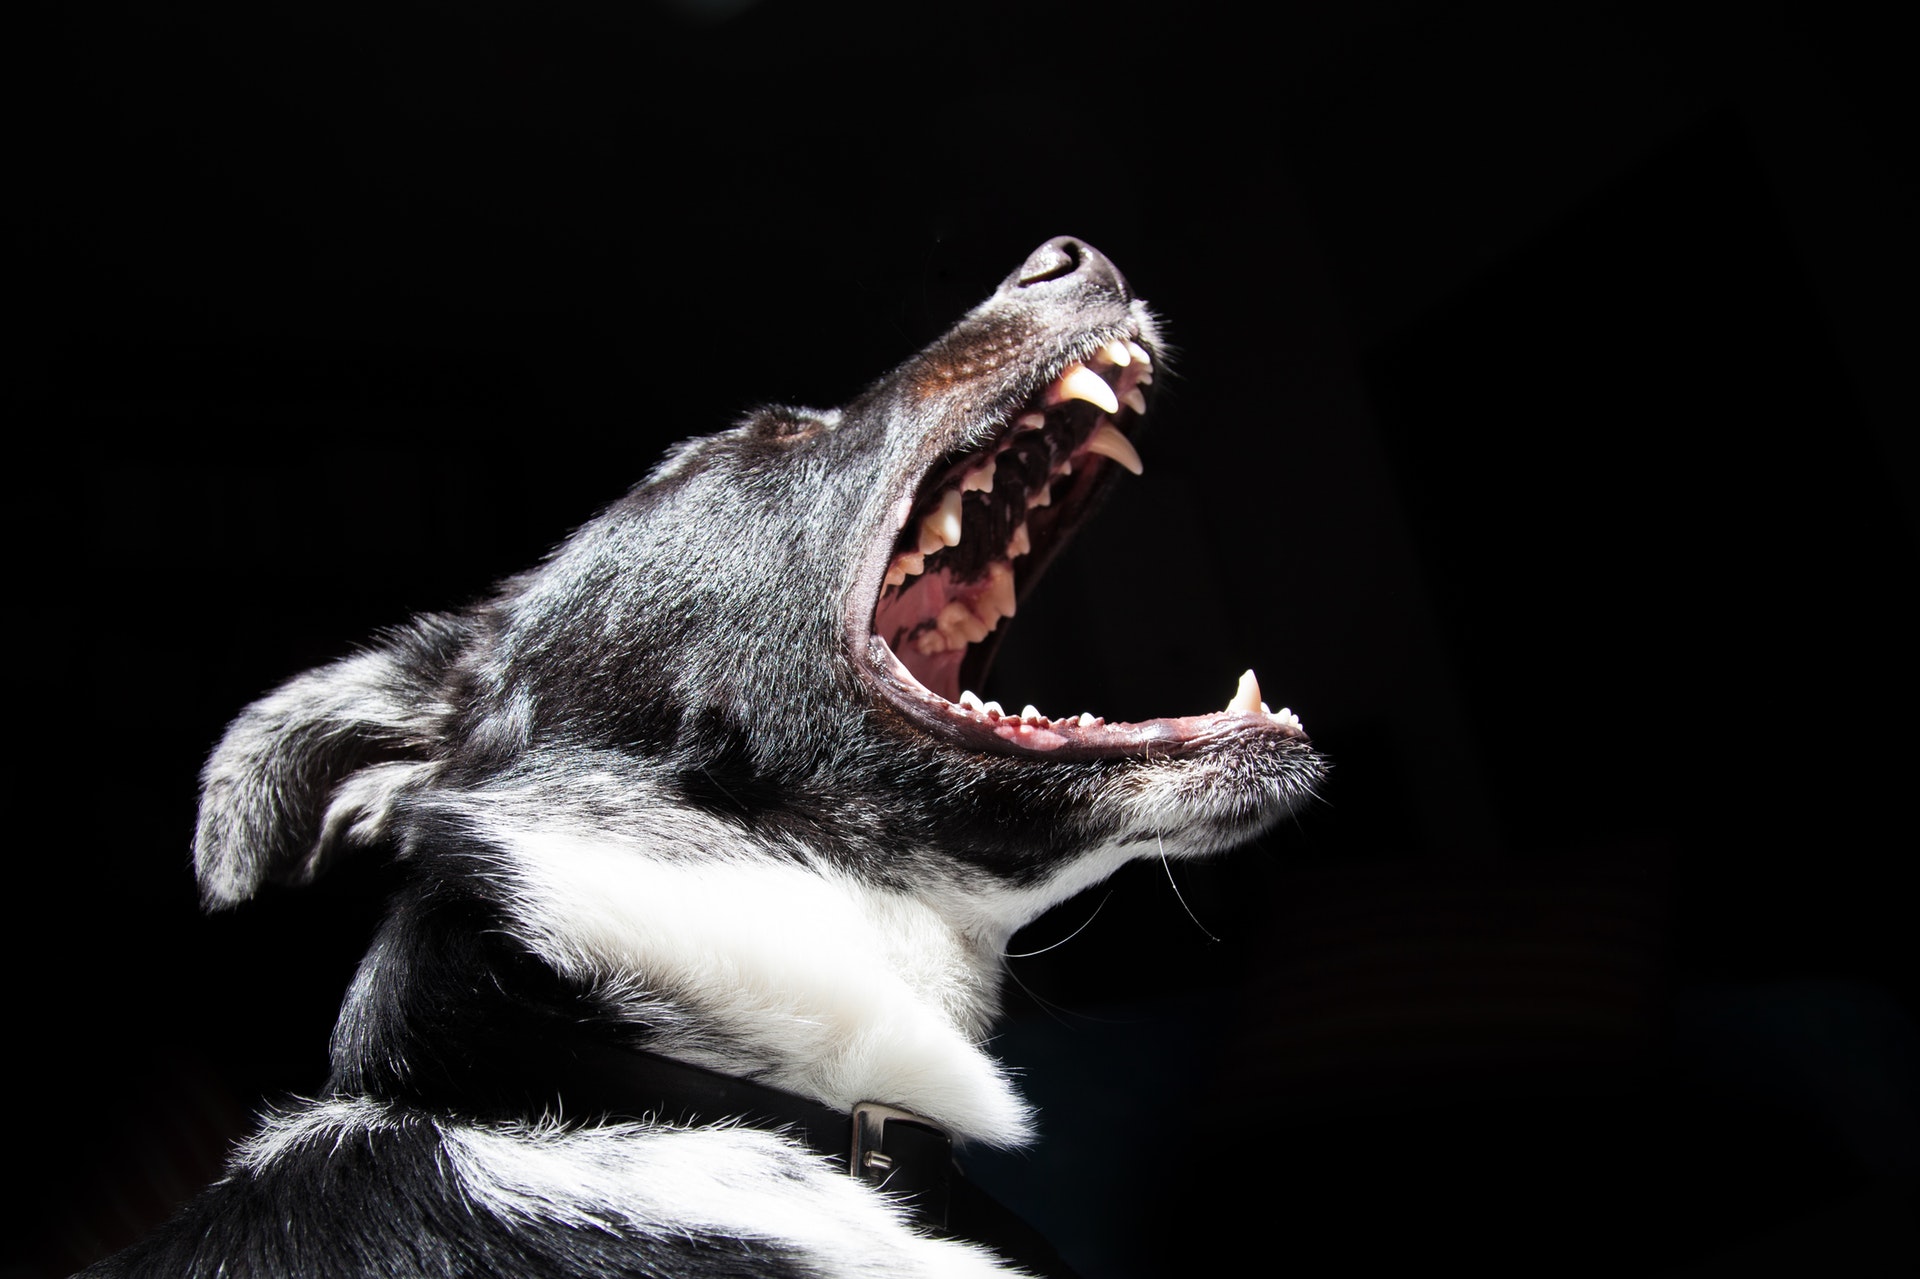 5 Reasons to Hire a Dog Bite Attorney